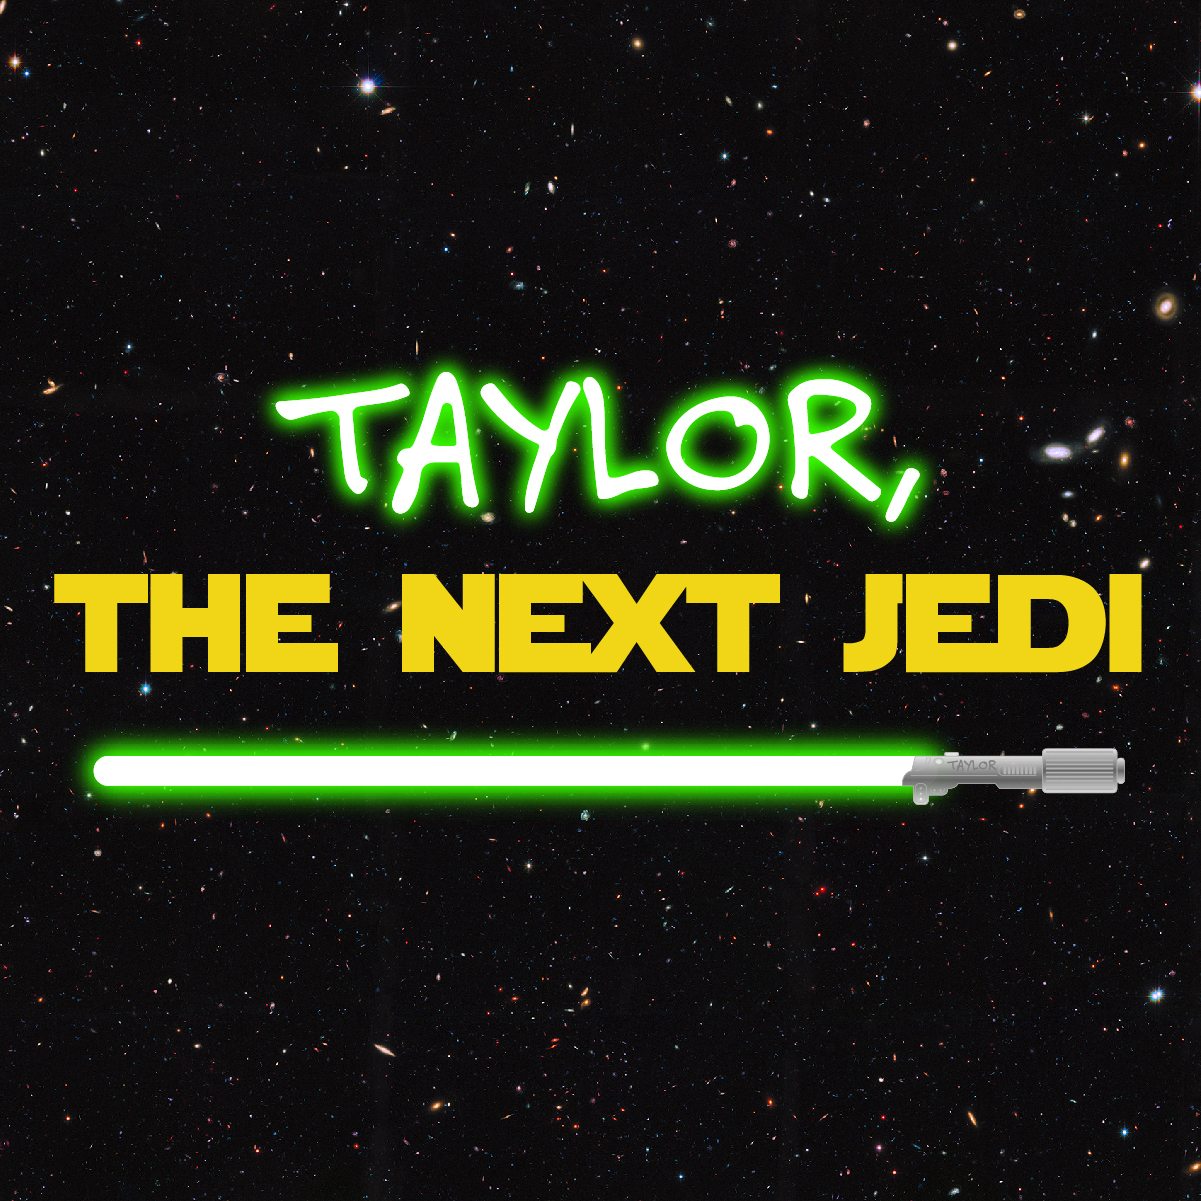 Taylor the Next Jedi graphic - green lightsaber on starfield